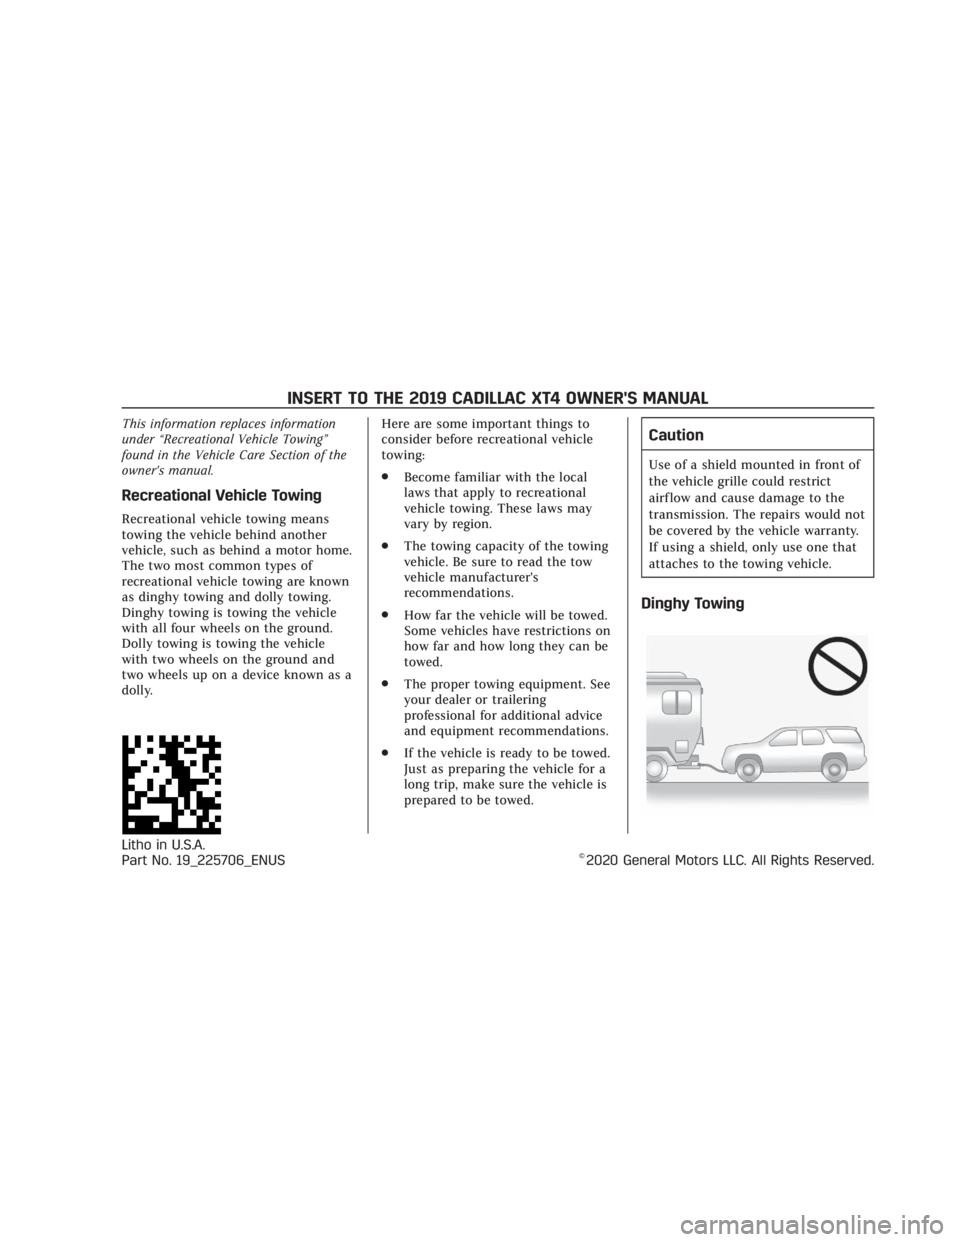 CADILLAC XT4 2019  Owners Manual Cadillac XT4 Owner Manual (GMNA-Localizing-U.S./Canada/Mexico-
12017481) - 2019 - Insert - 1/15/20
This information replaces information
under“Recreational Vehicle Towing”
found in the Vehicle Car